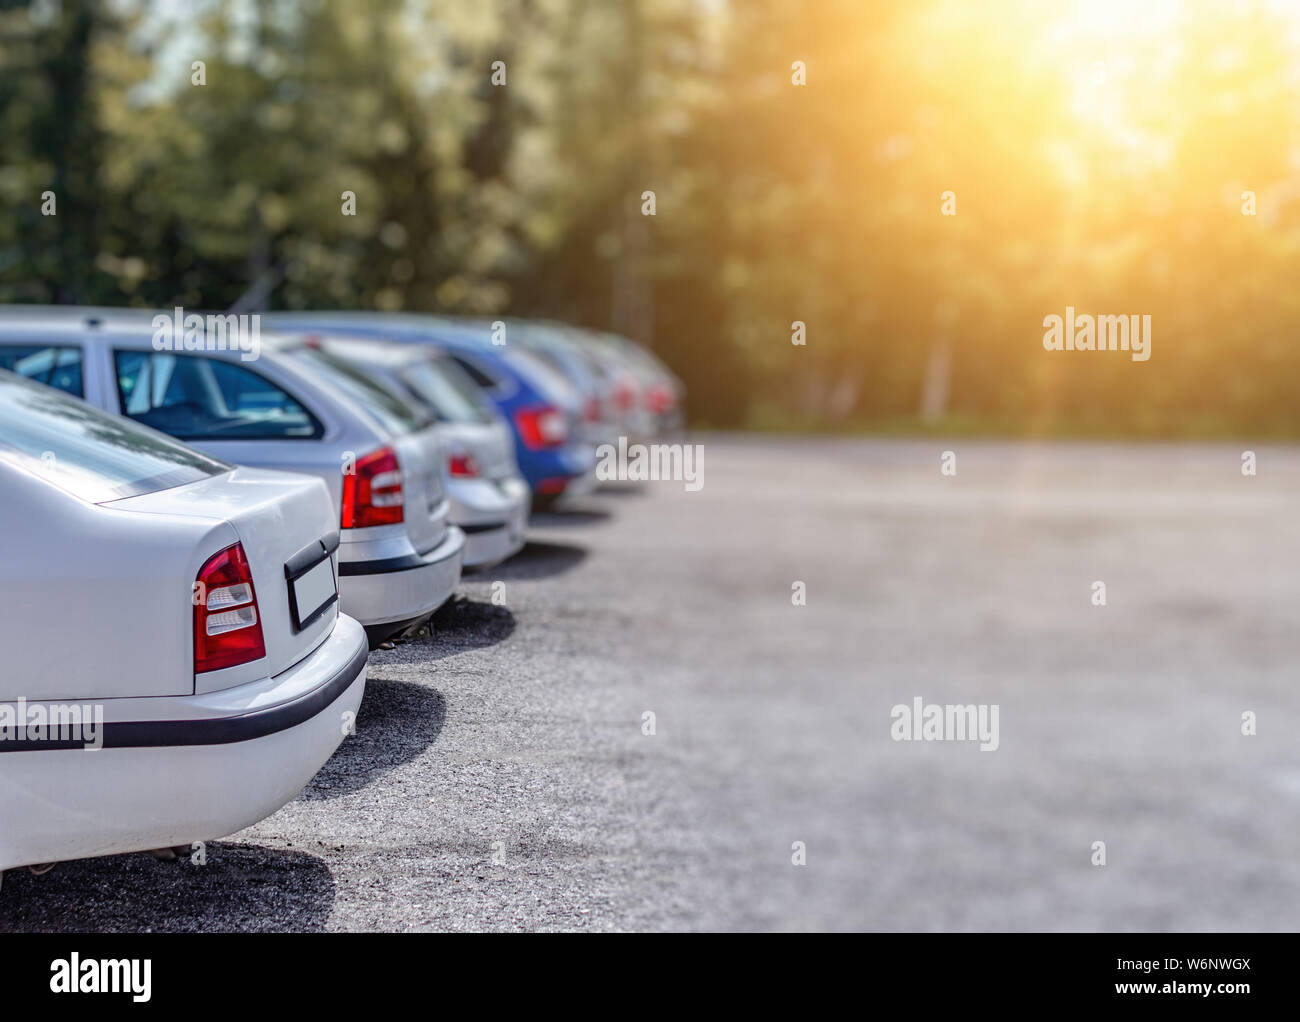 germany krankenwagen used – Search for your used car on the parking